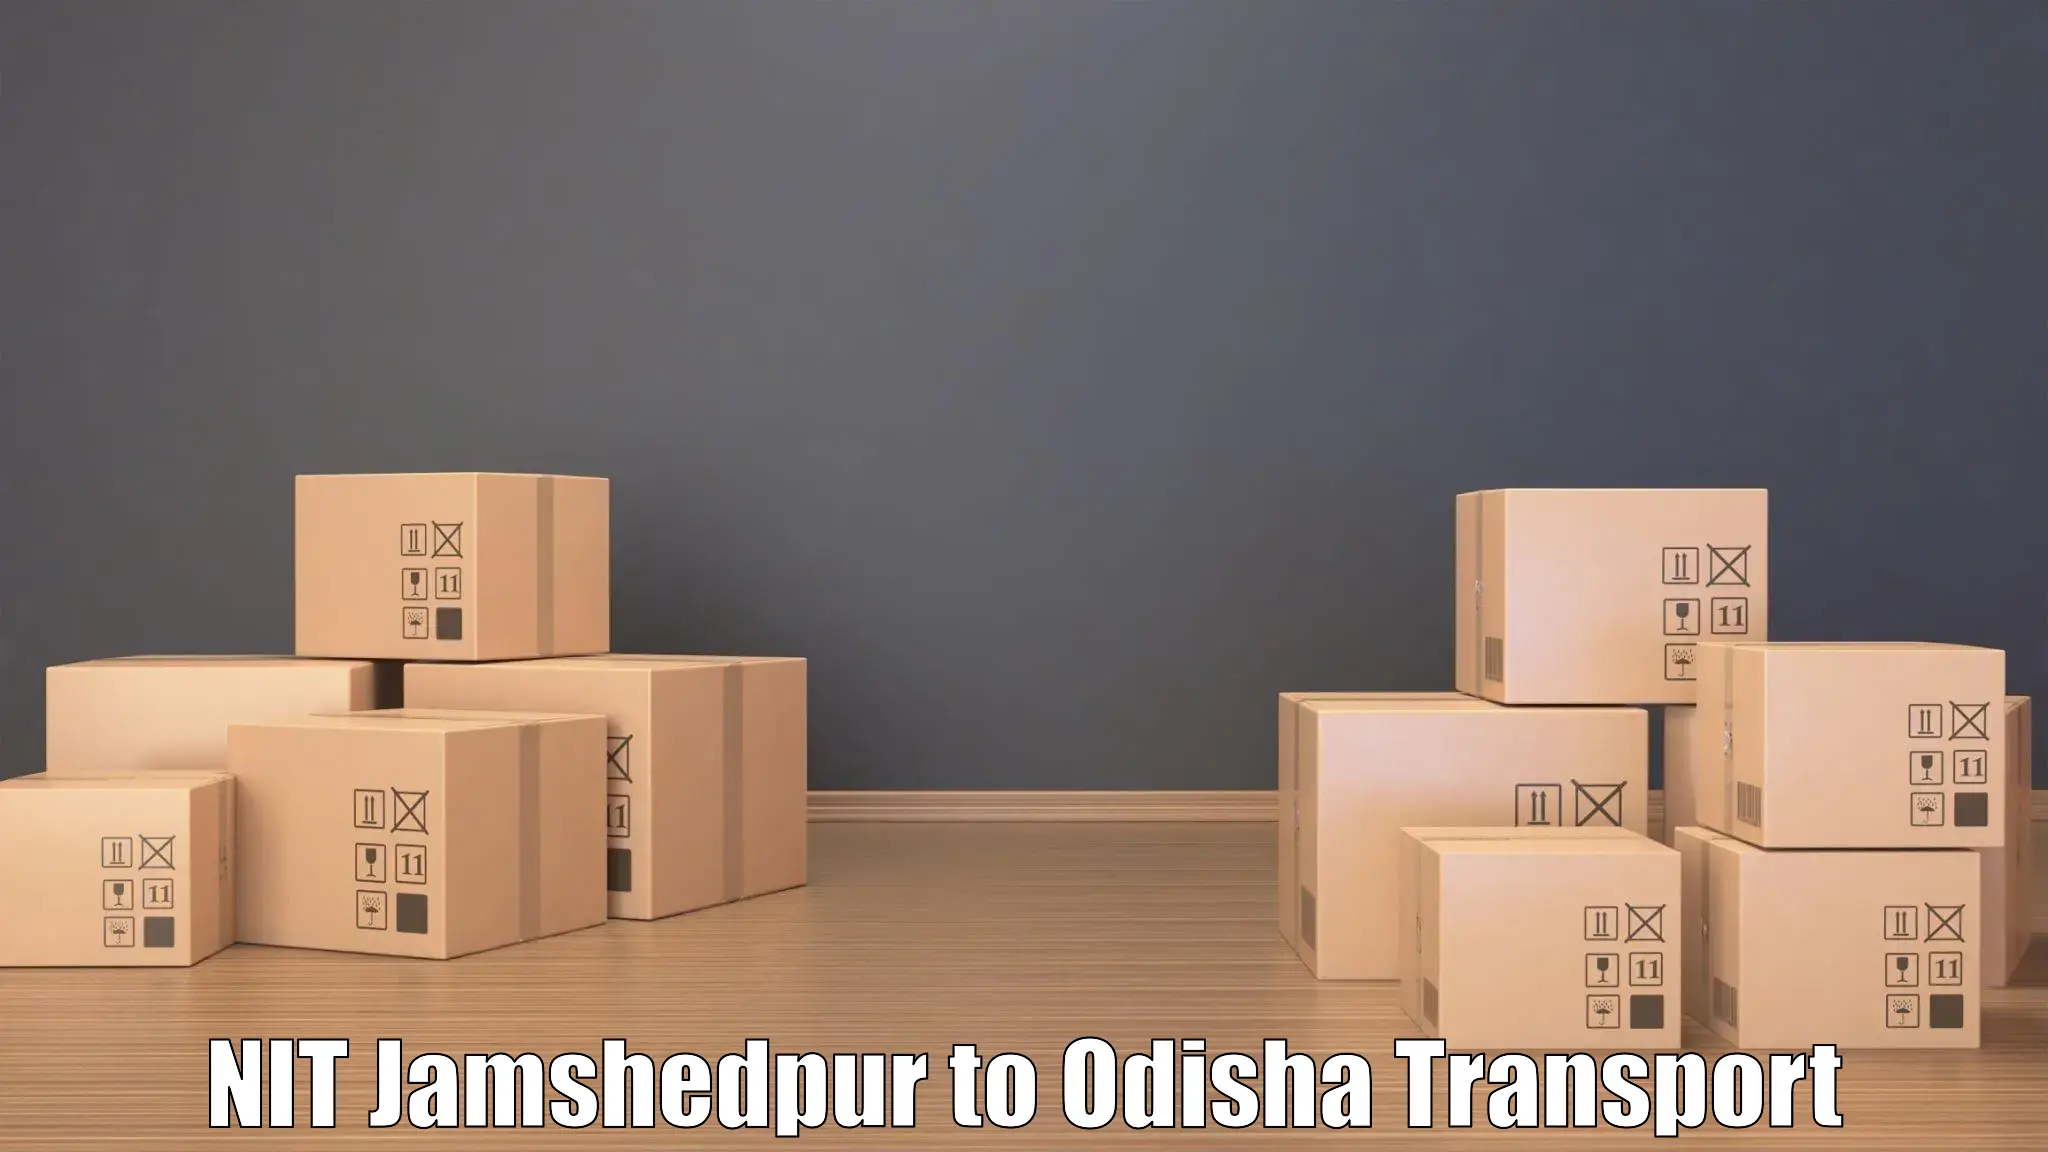 Container transportation services NIT Jamshedpur to Chandinchowk